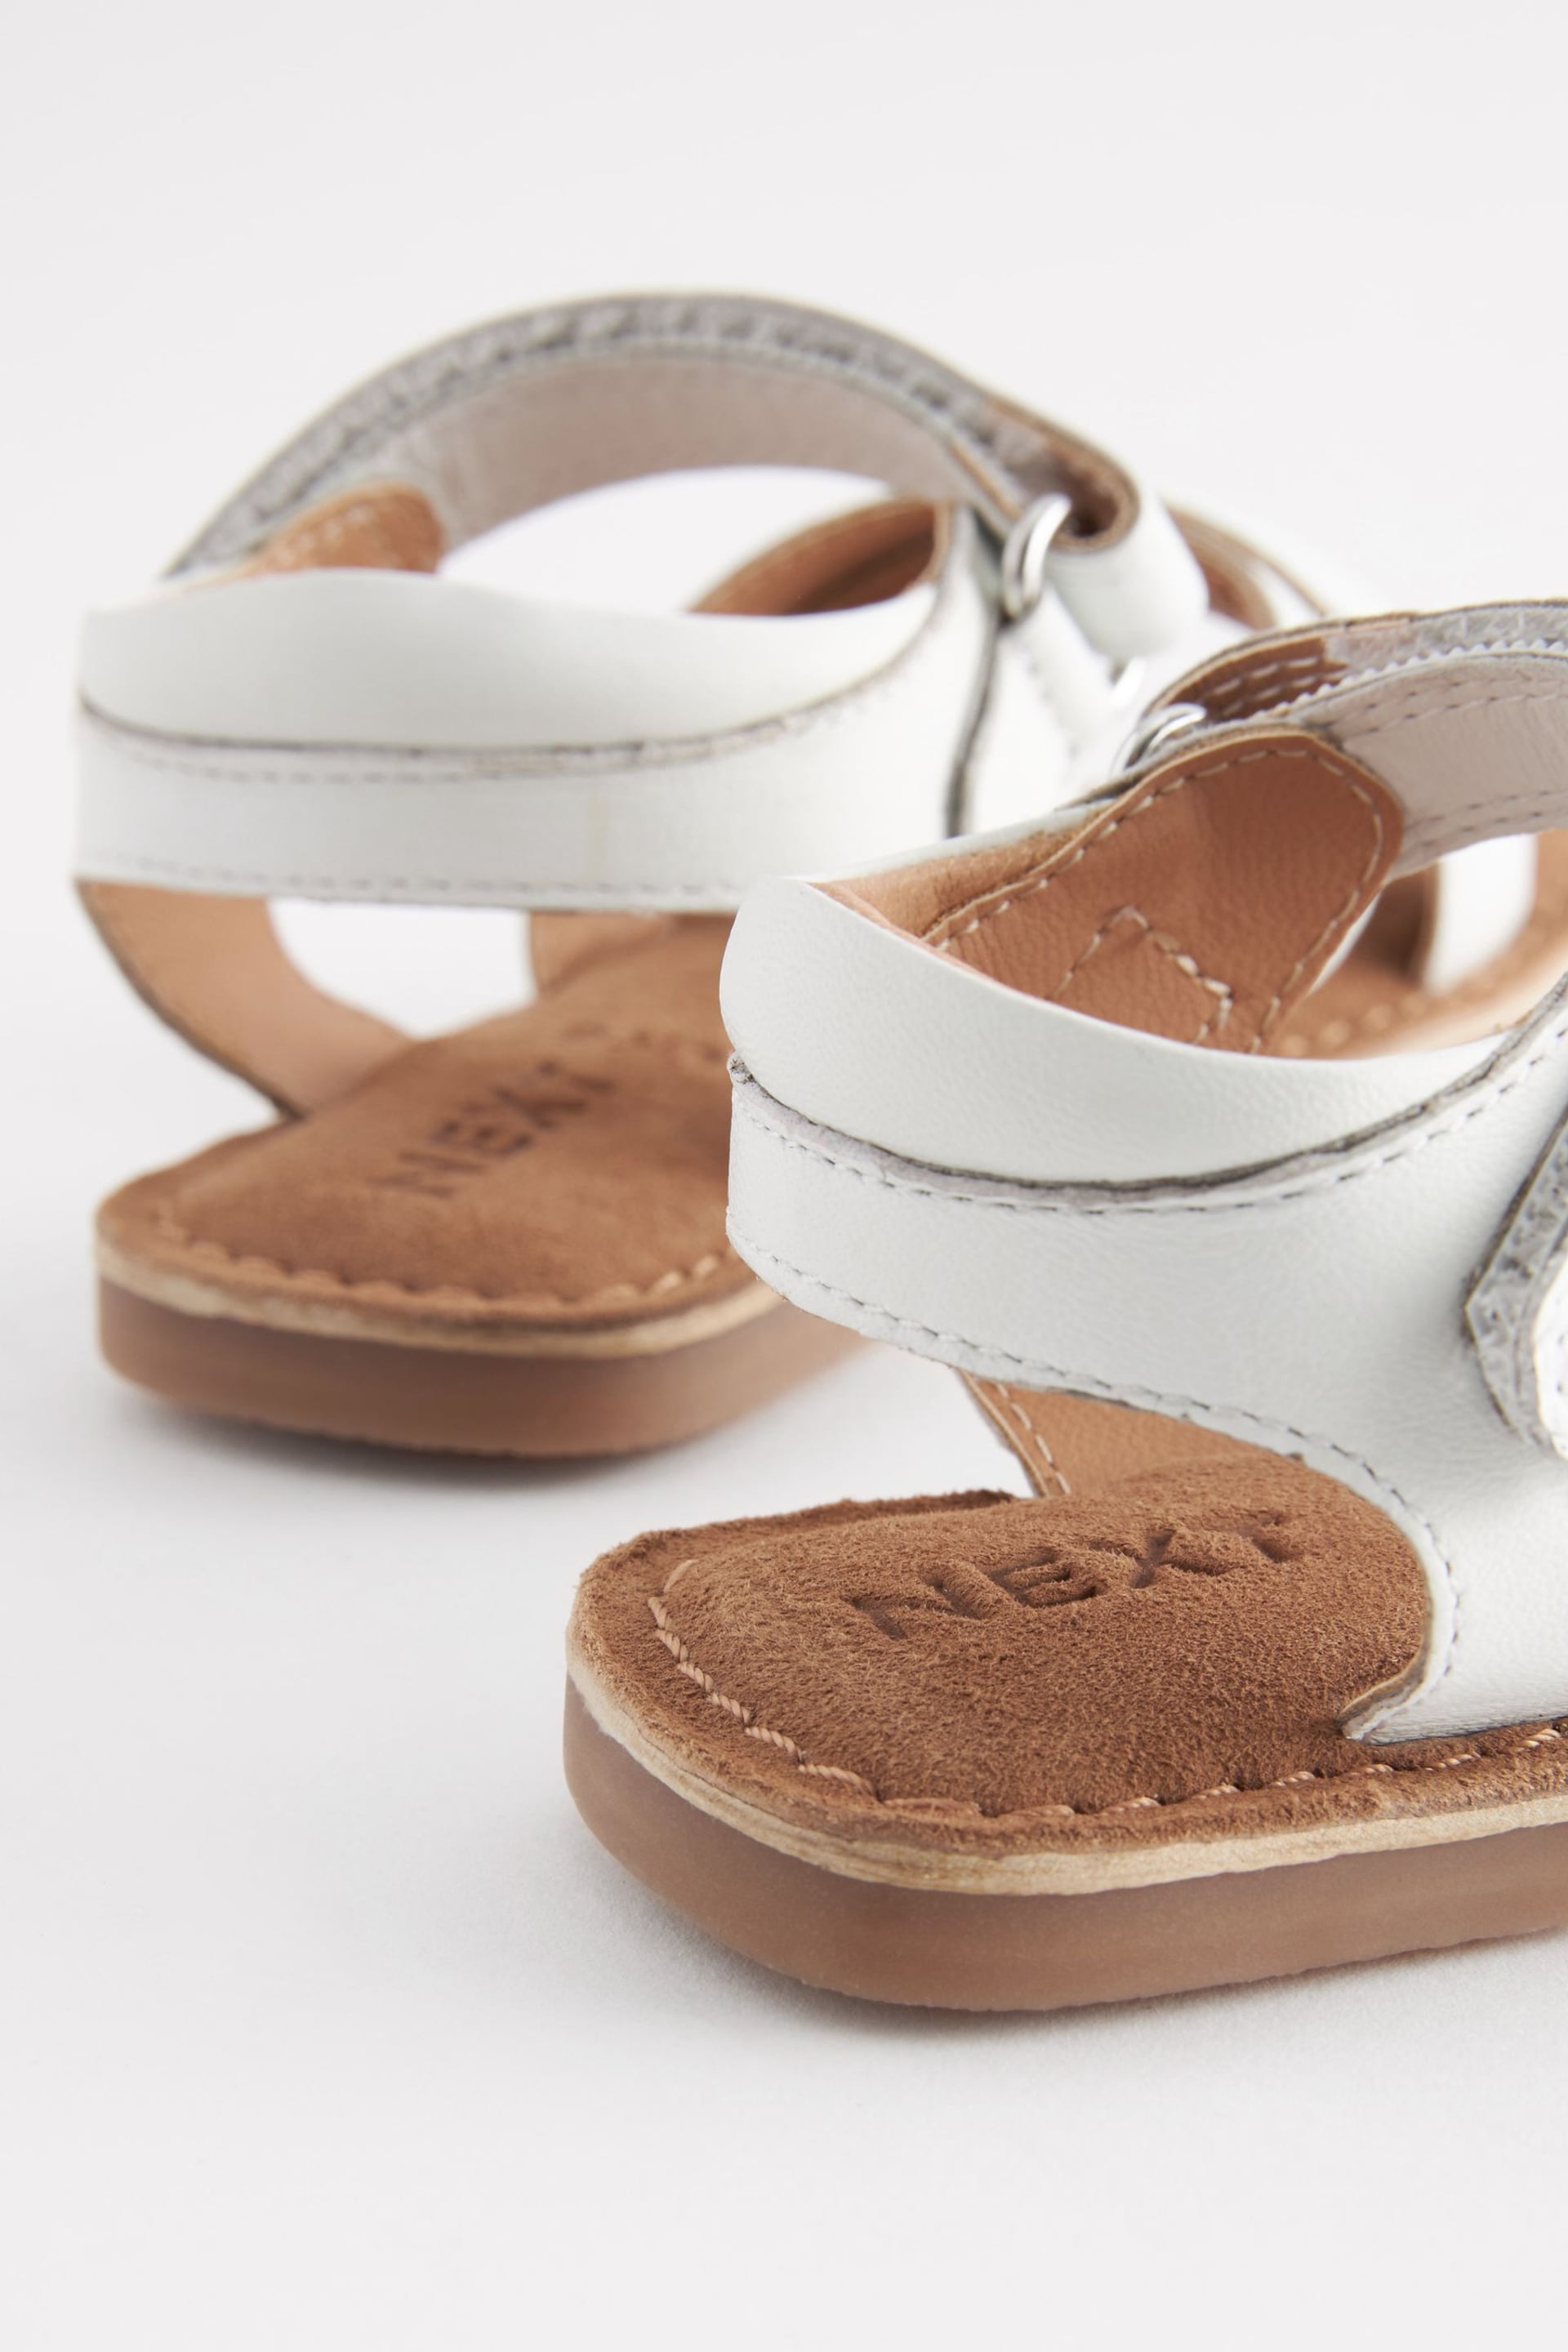 White Leather Sandals - Image 3 of 7